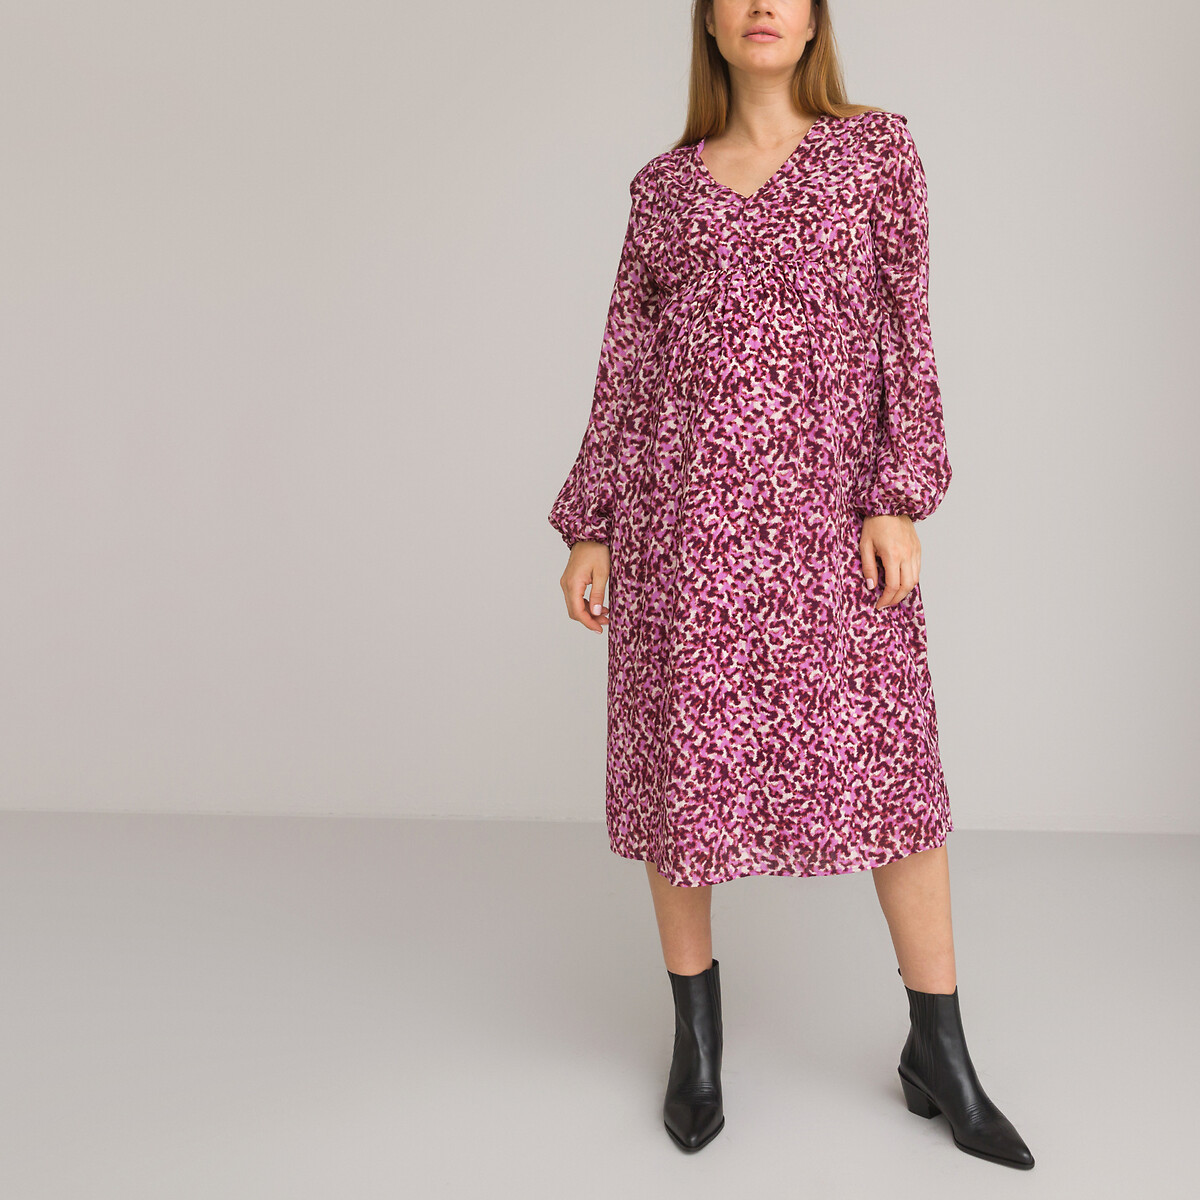 Recycled Maternity Midi Dress in Floral Print with V-Neck and Long Sleeves